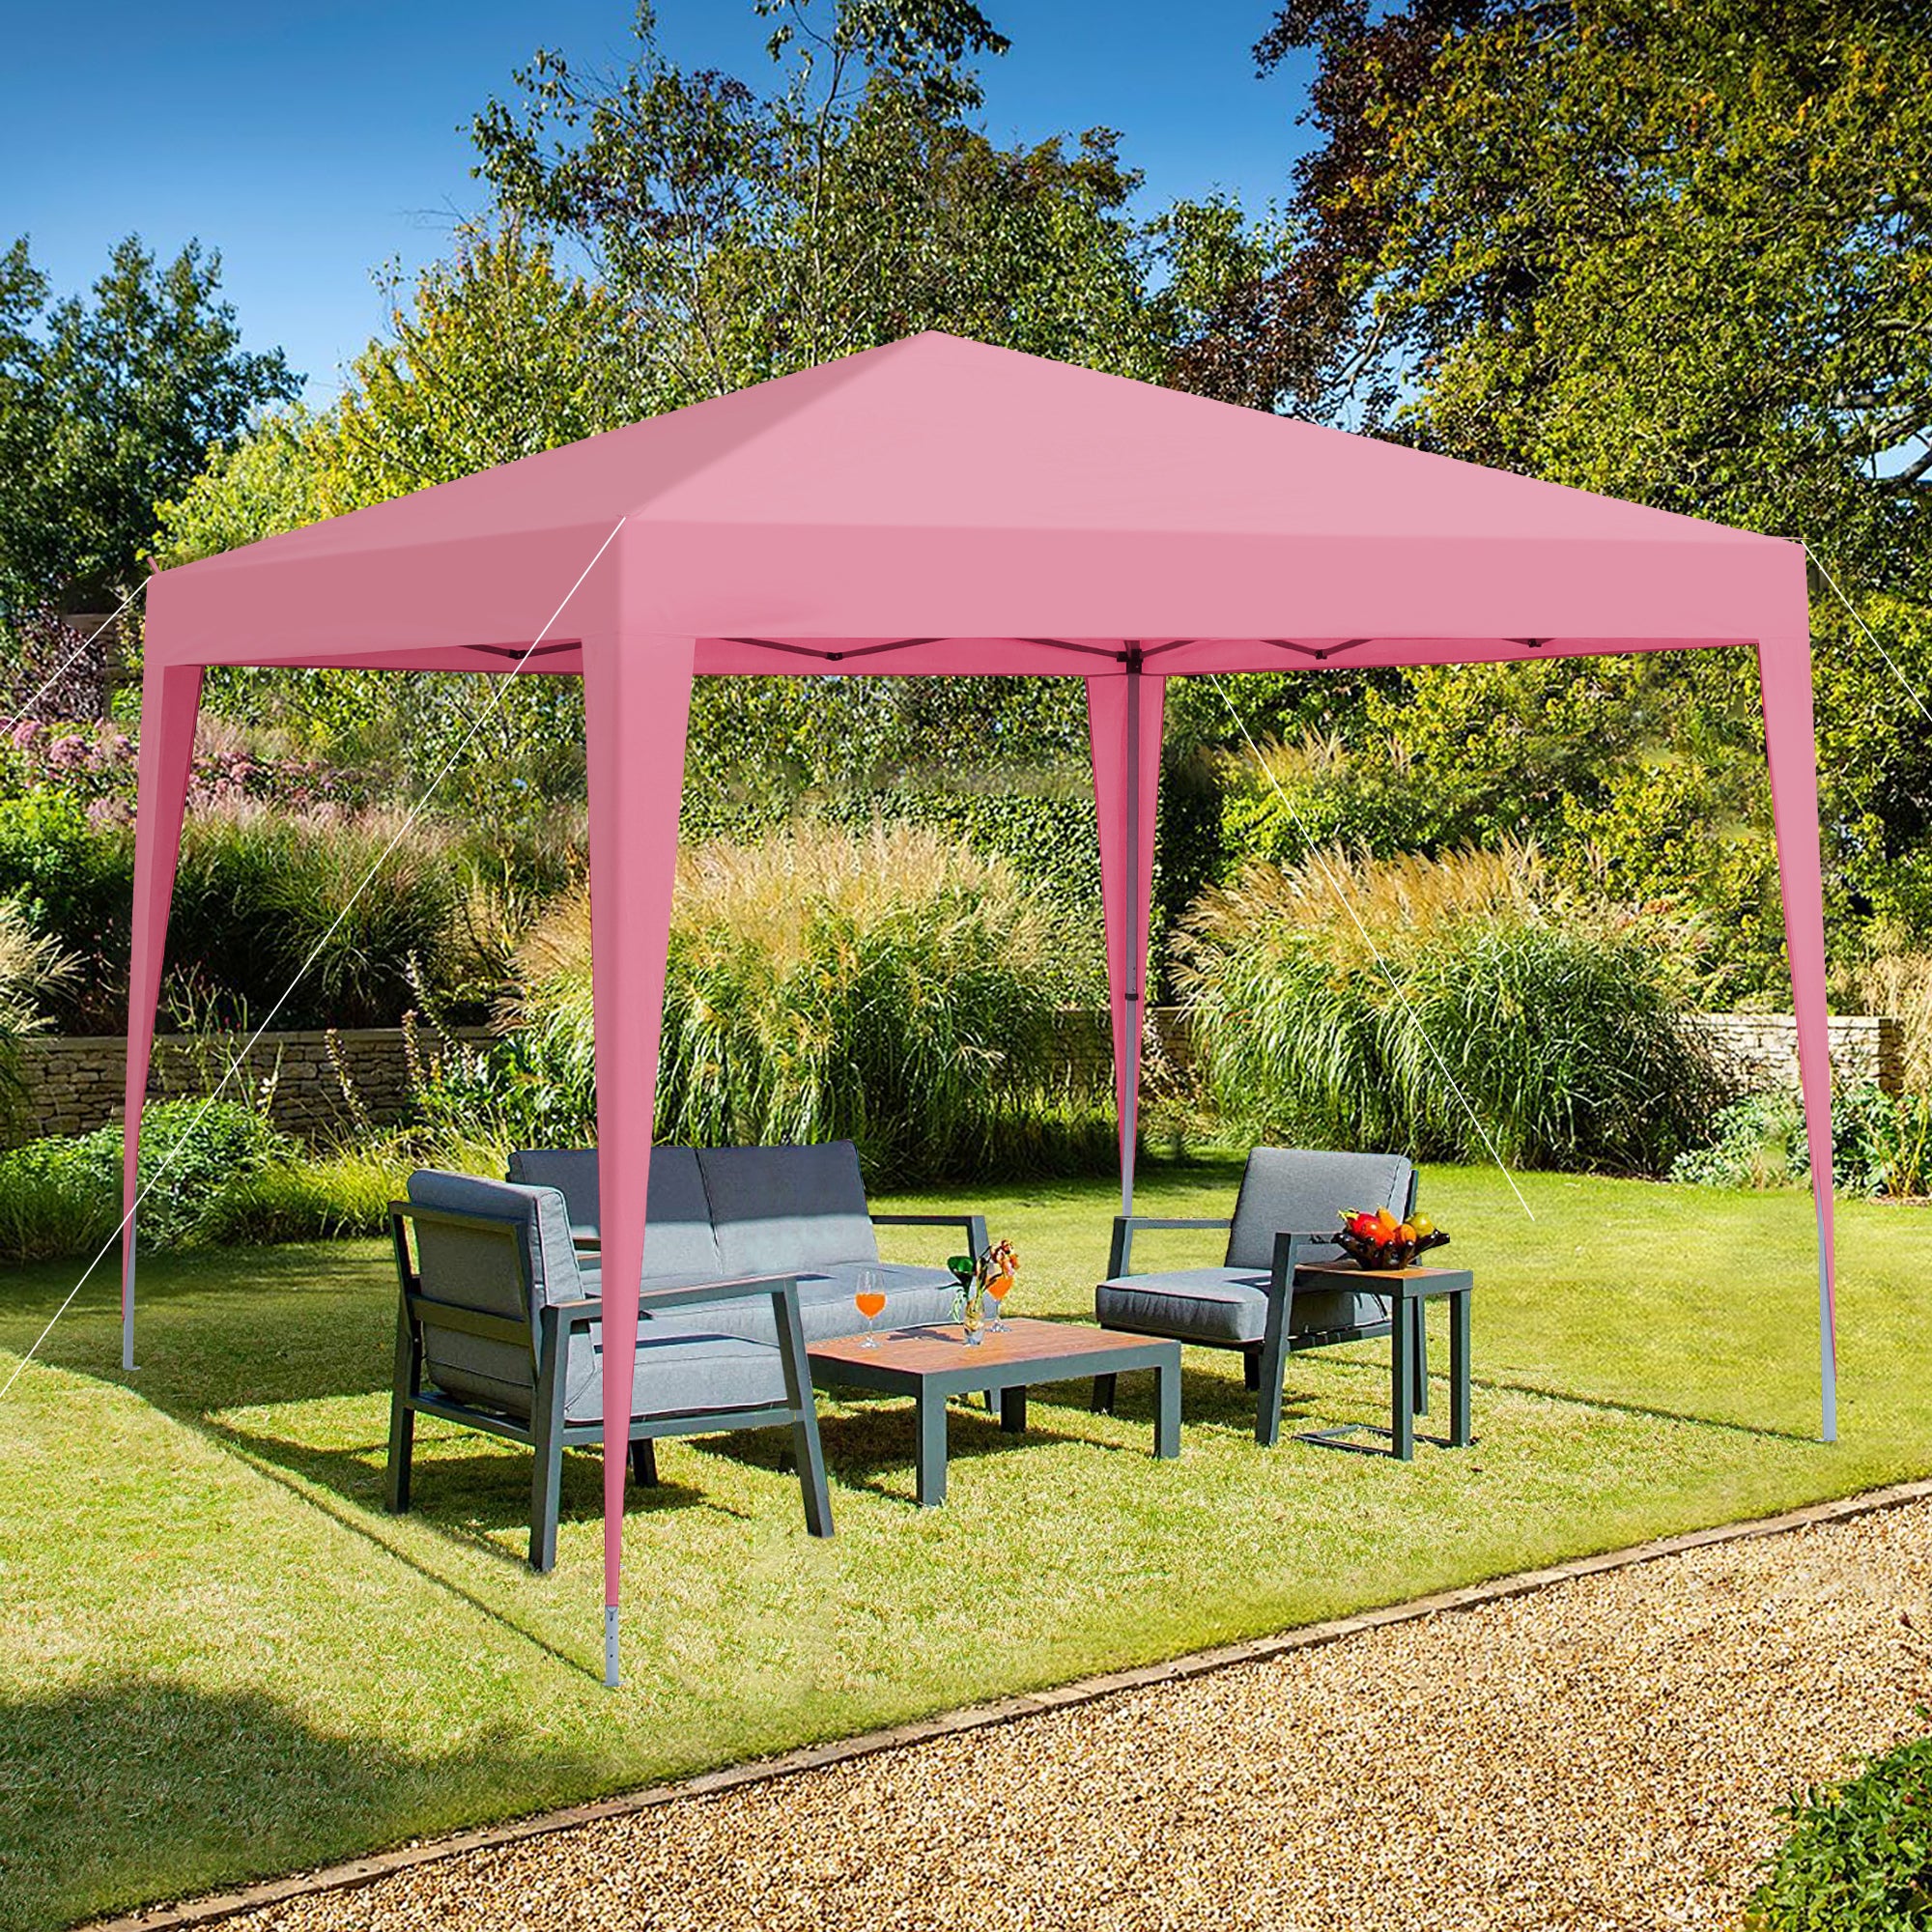 Outdoor 10x 10Ft Pop Up Gazebo Canopy Tent with 4pcs pink-metal